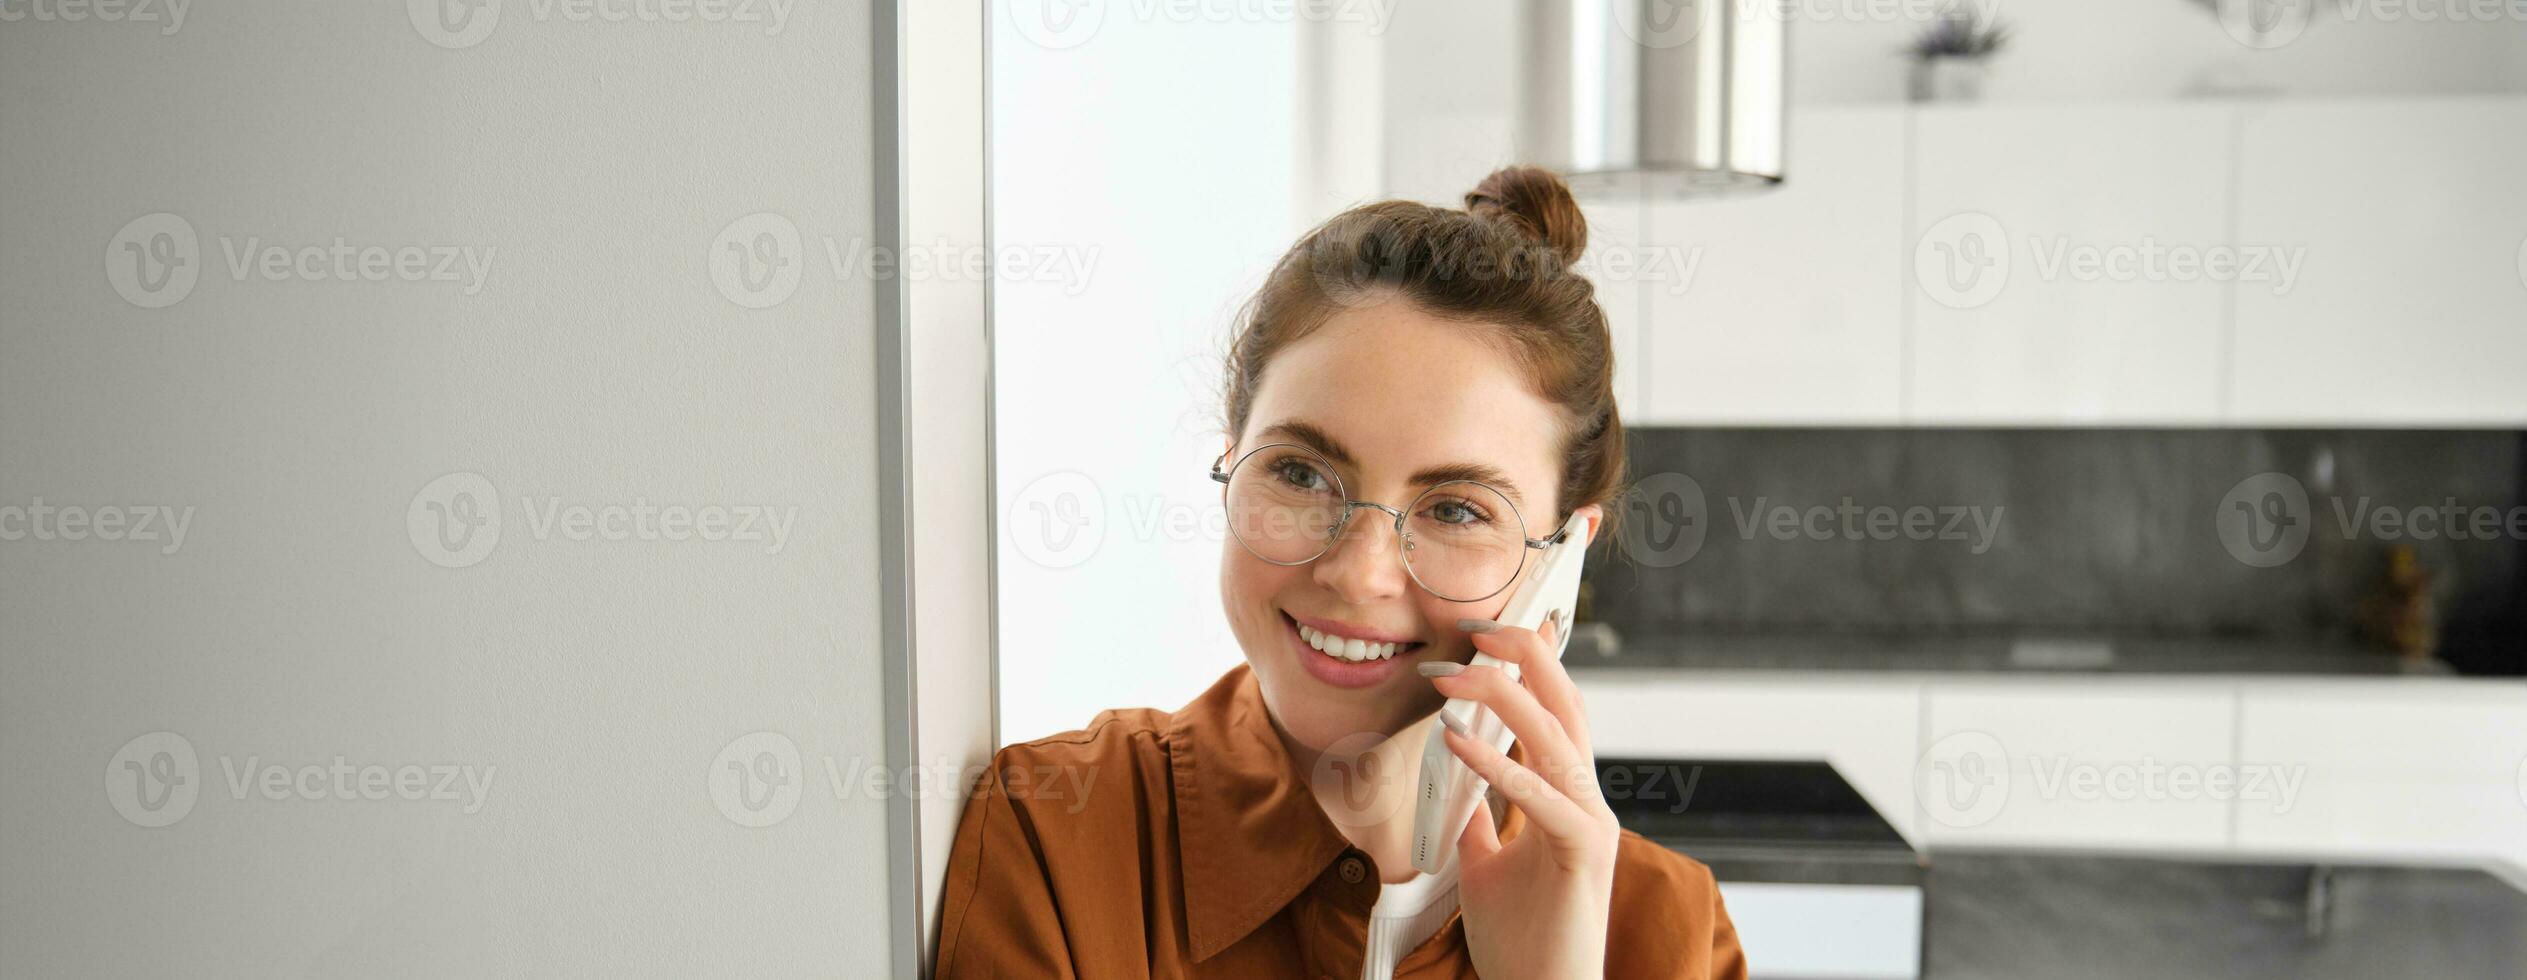 Portrait of happy woman at home, answers phone call, talking on mobile, holding smartphone and smiling photo